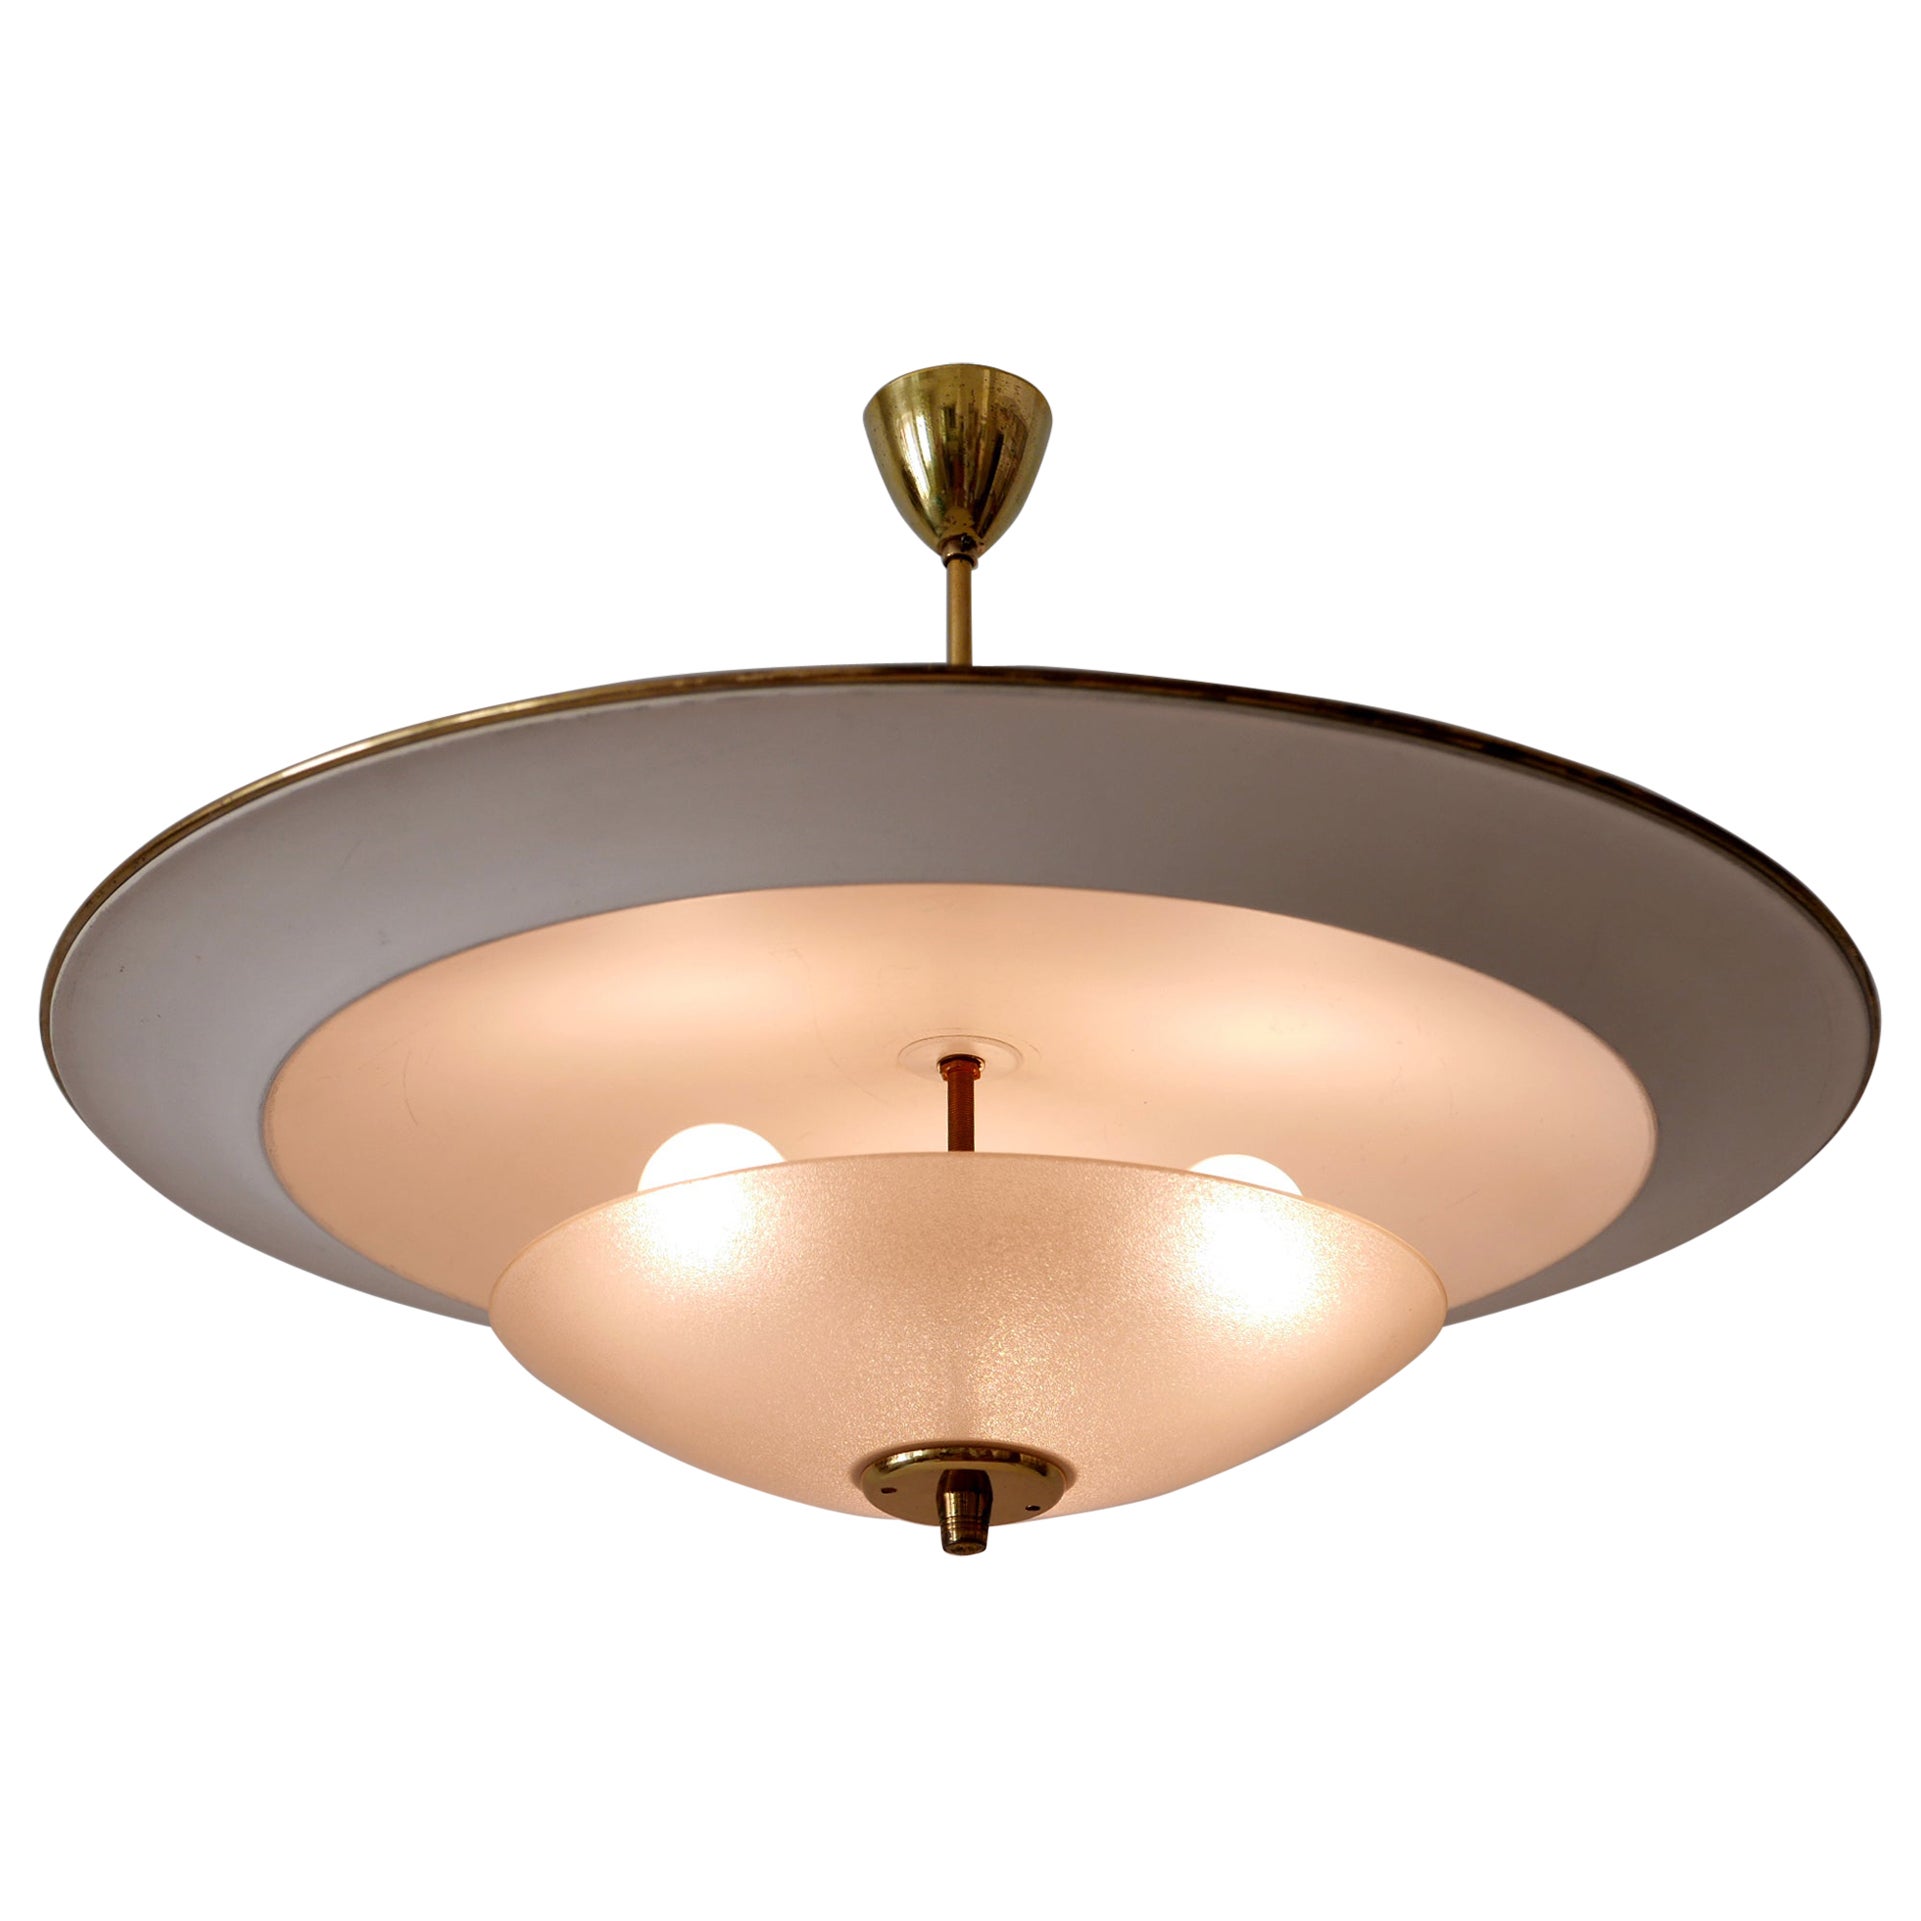 Large Mid-Century Modern 'Ufo' Ceiling Light or Pendant Lamp Germany 1950s № 1 For Sale